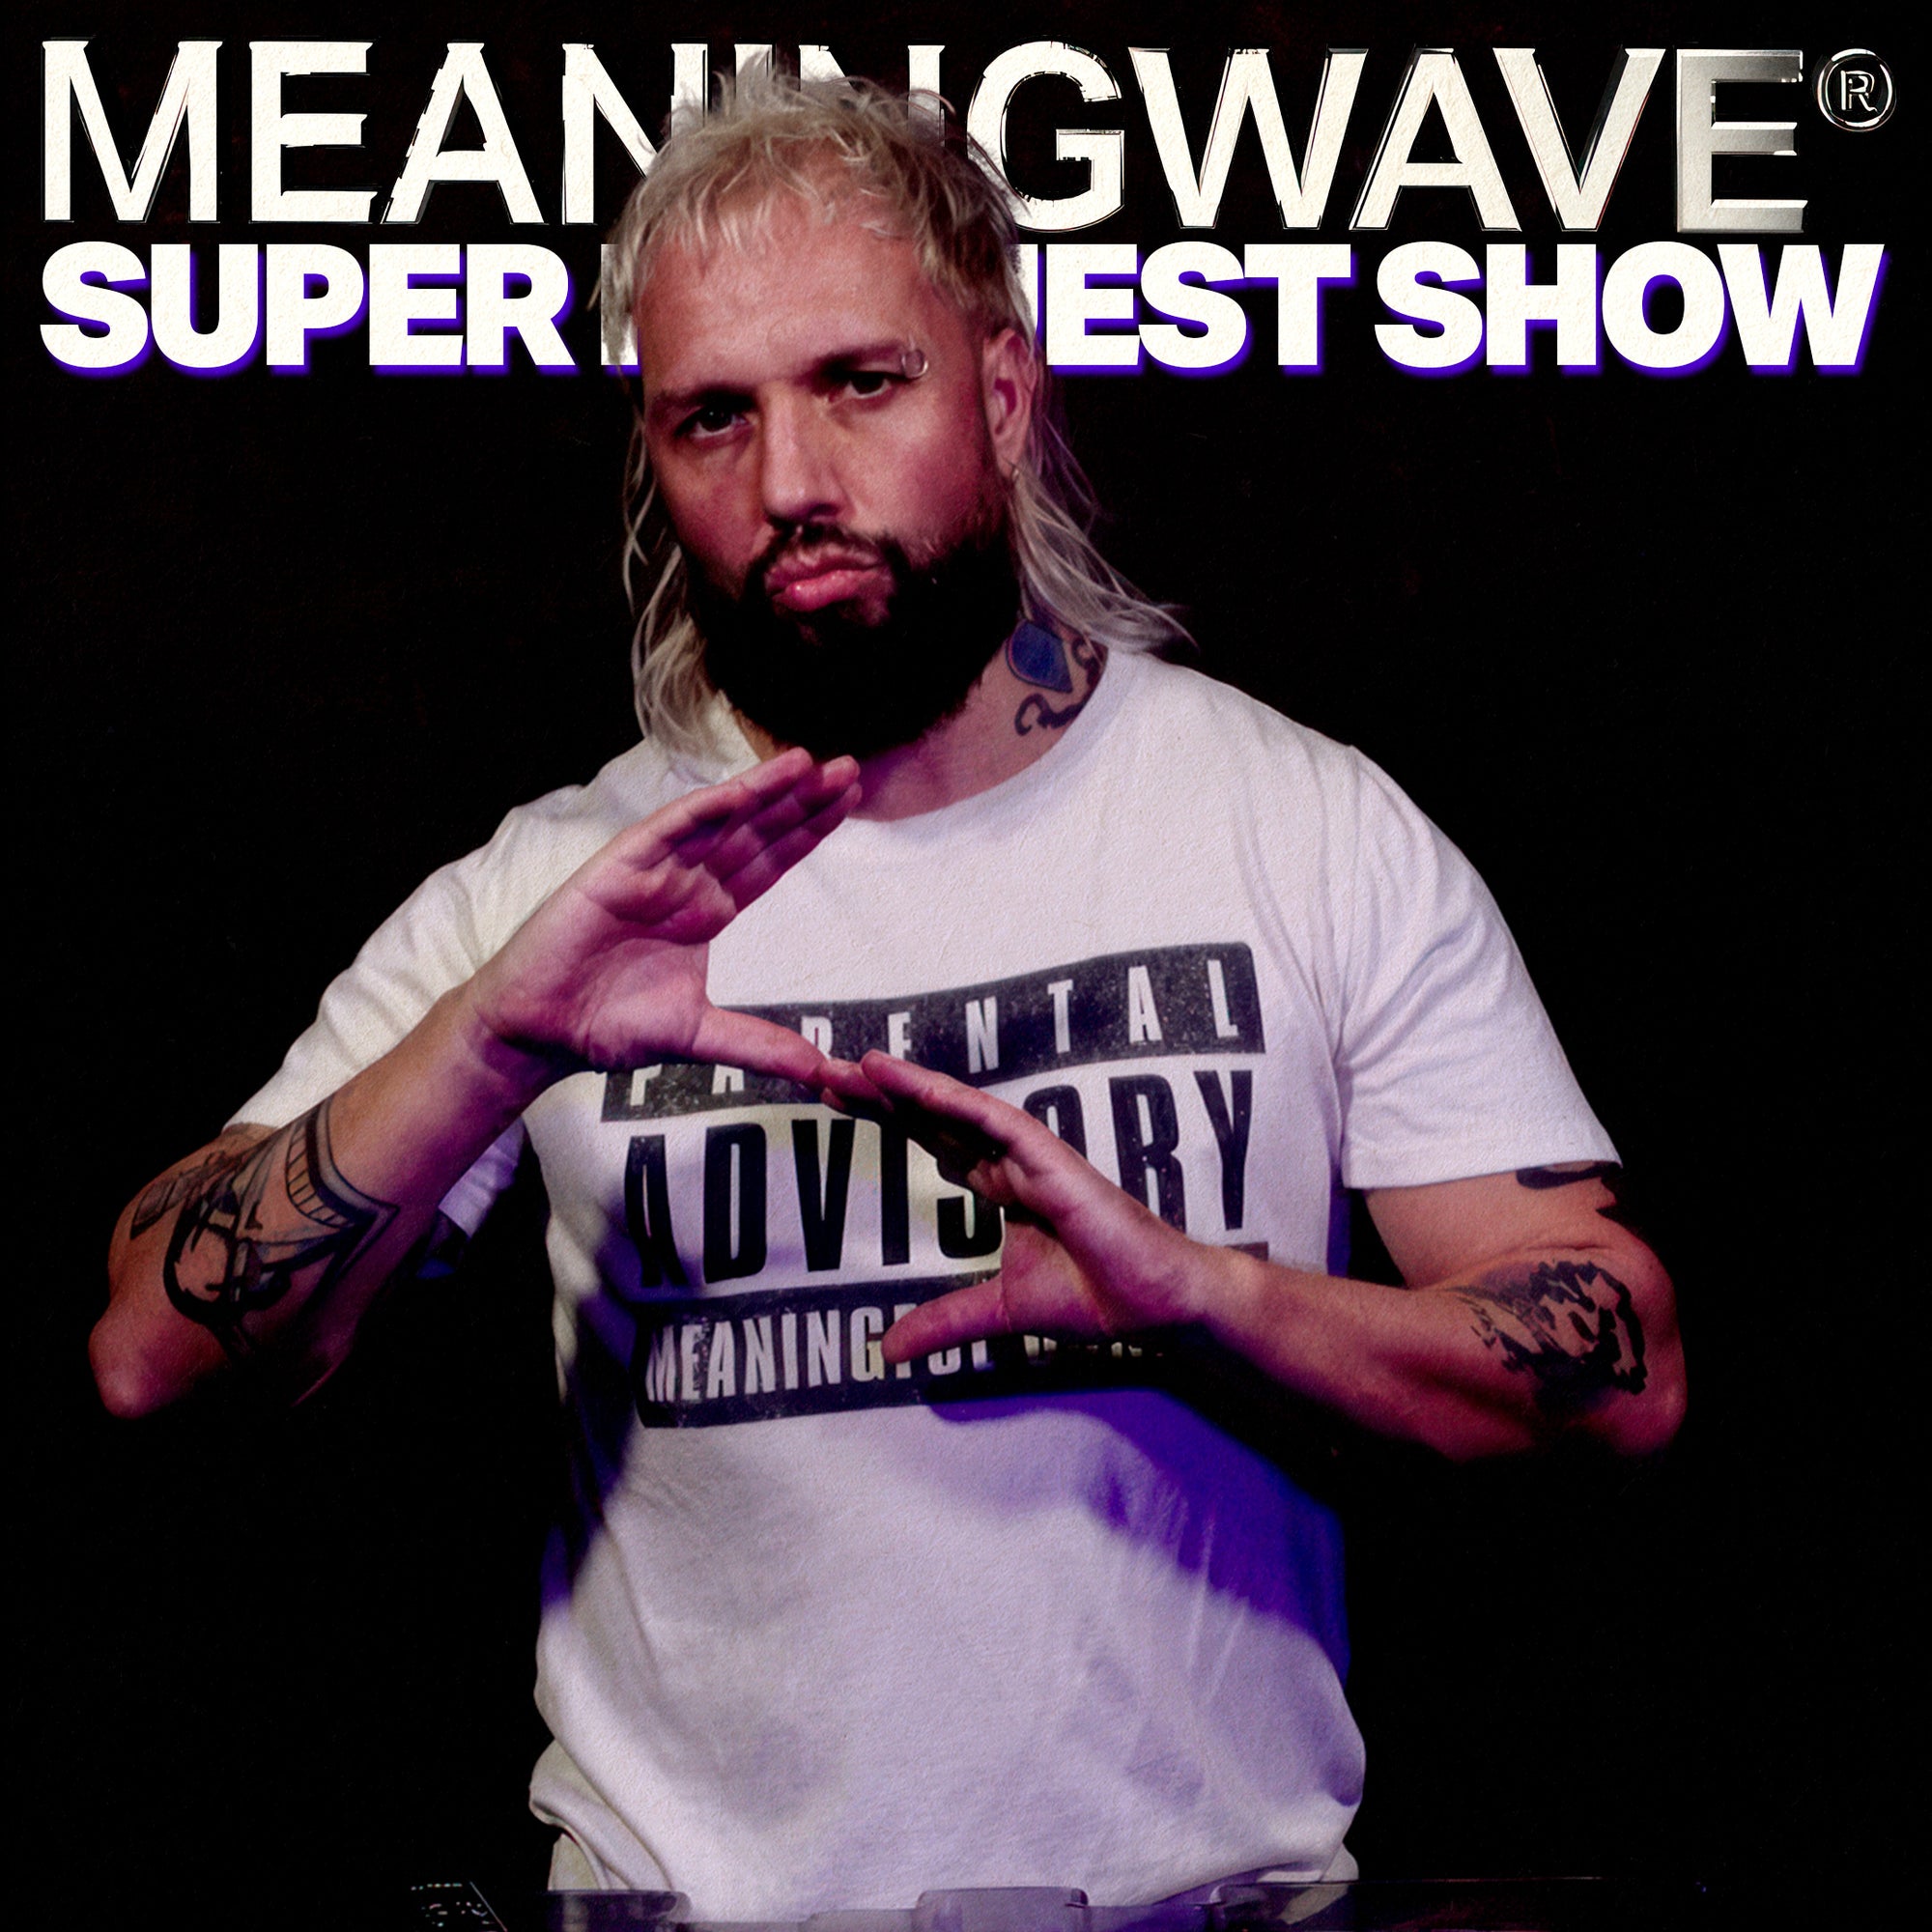 MEANINGWAVE SUPER REQUEST SHOW! - MEANINGSTREAM 470 | STREAM